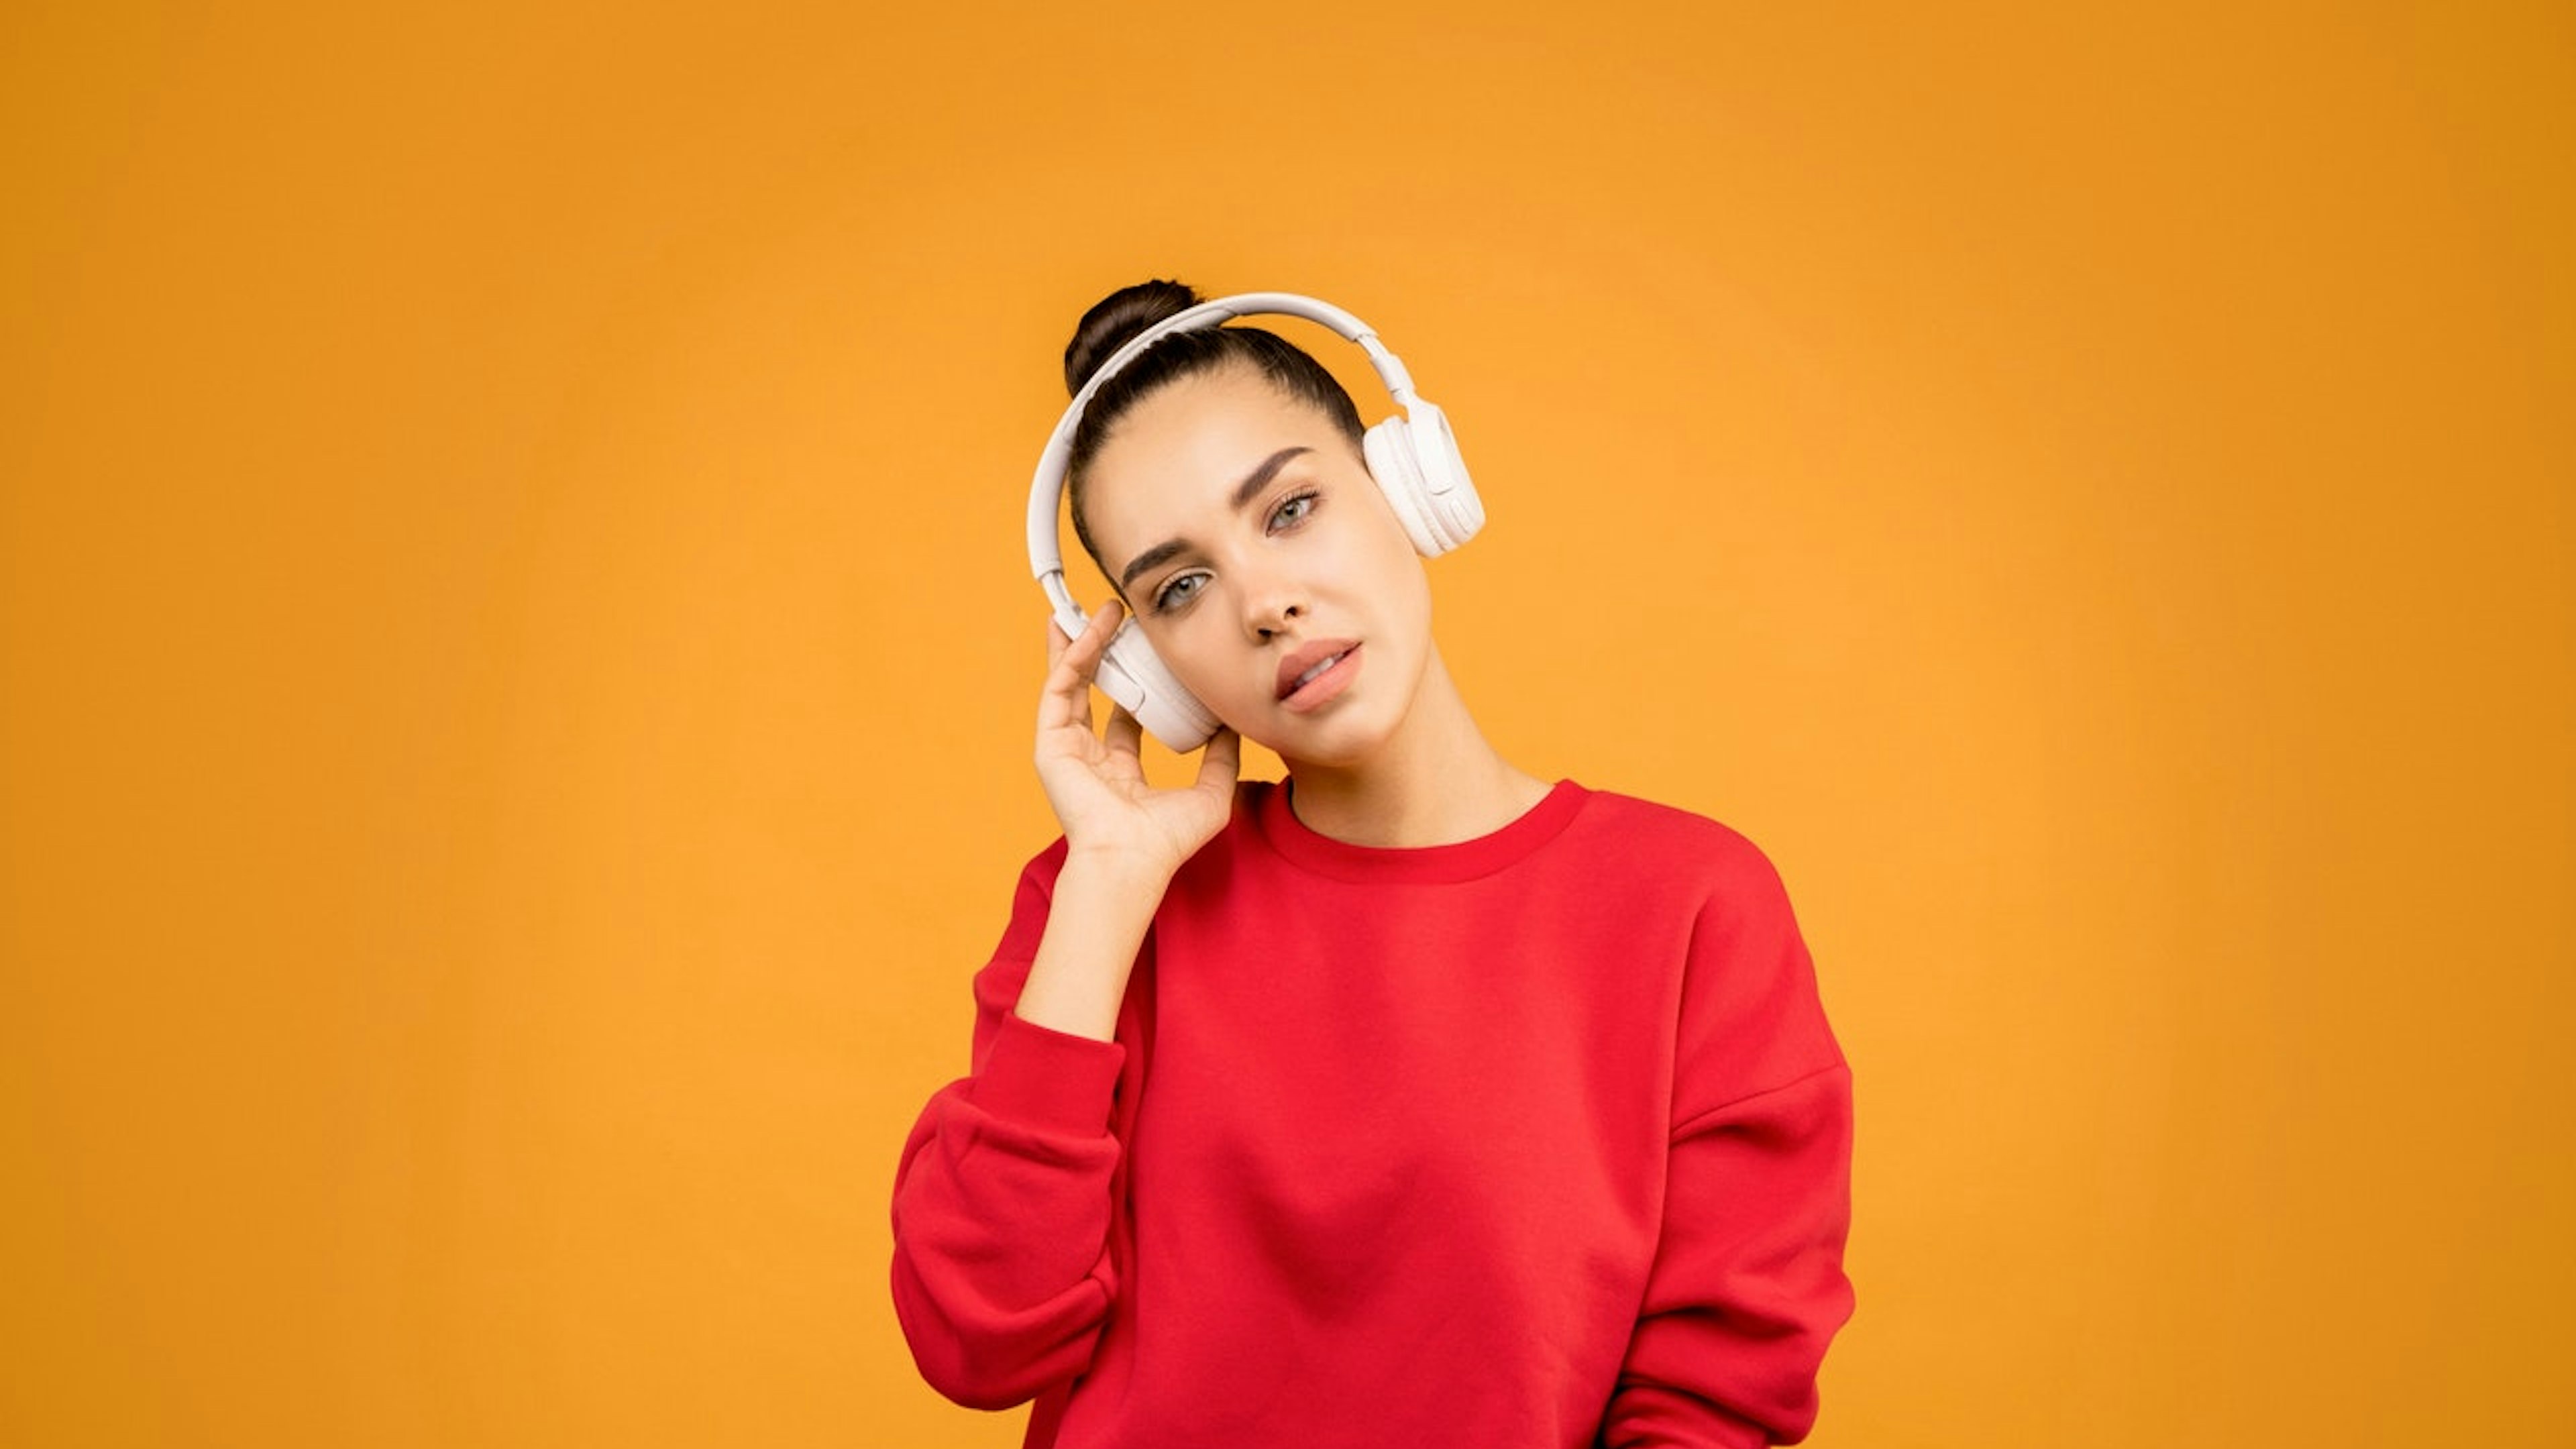 Top 9 Podcasts for Software Developers in 2022